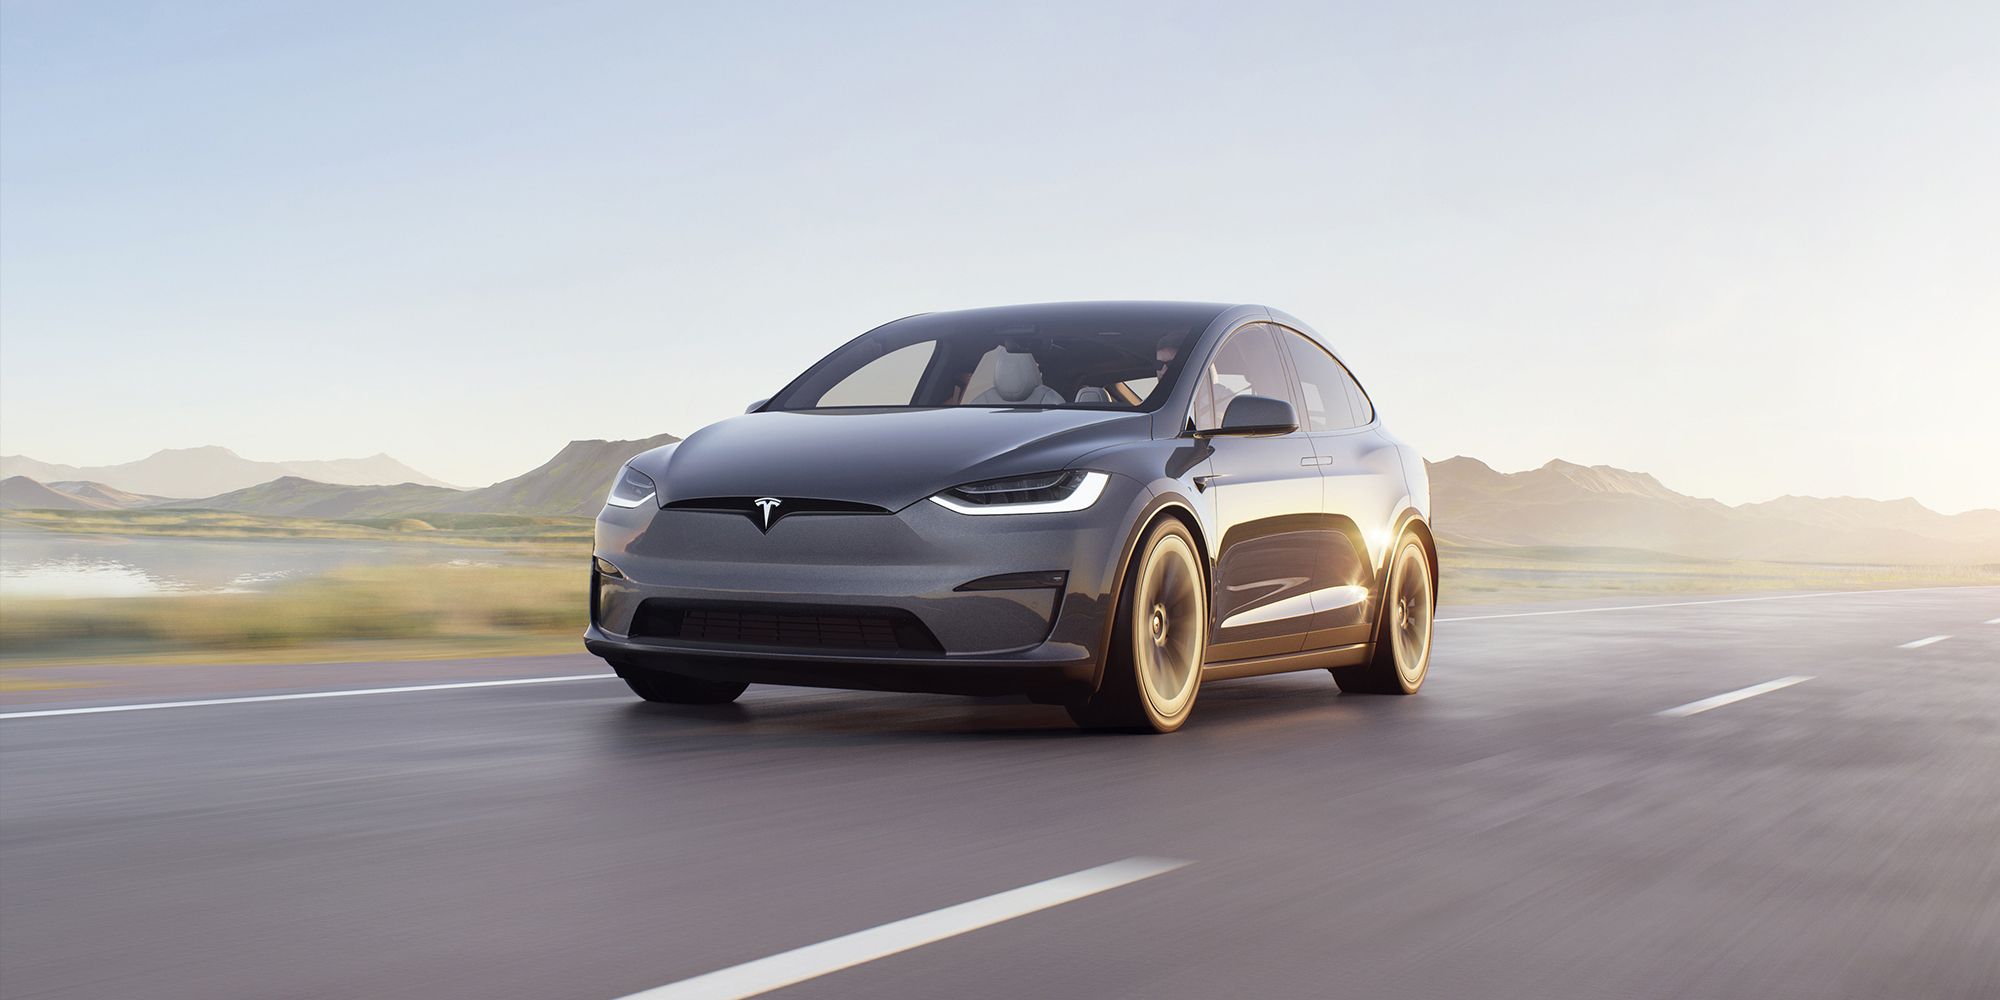 The front of the Model X in gray